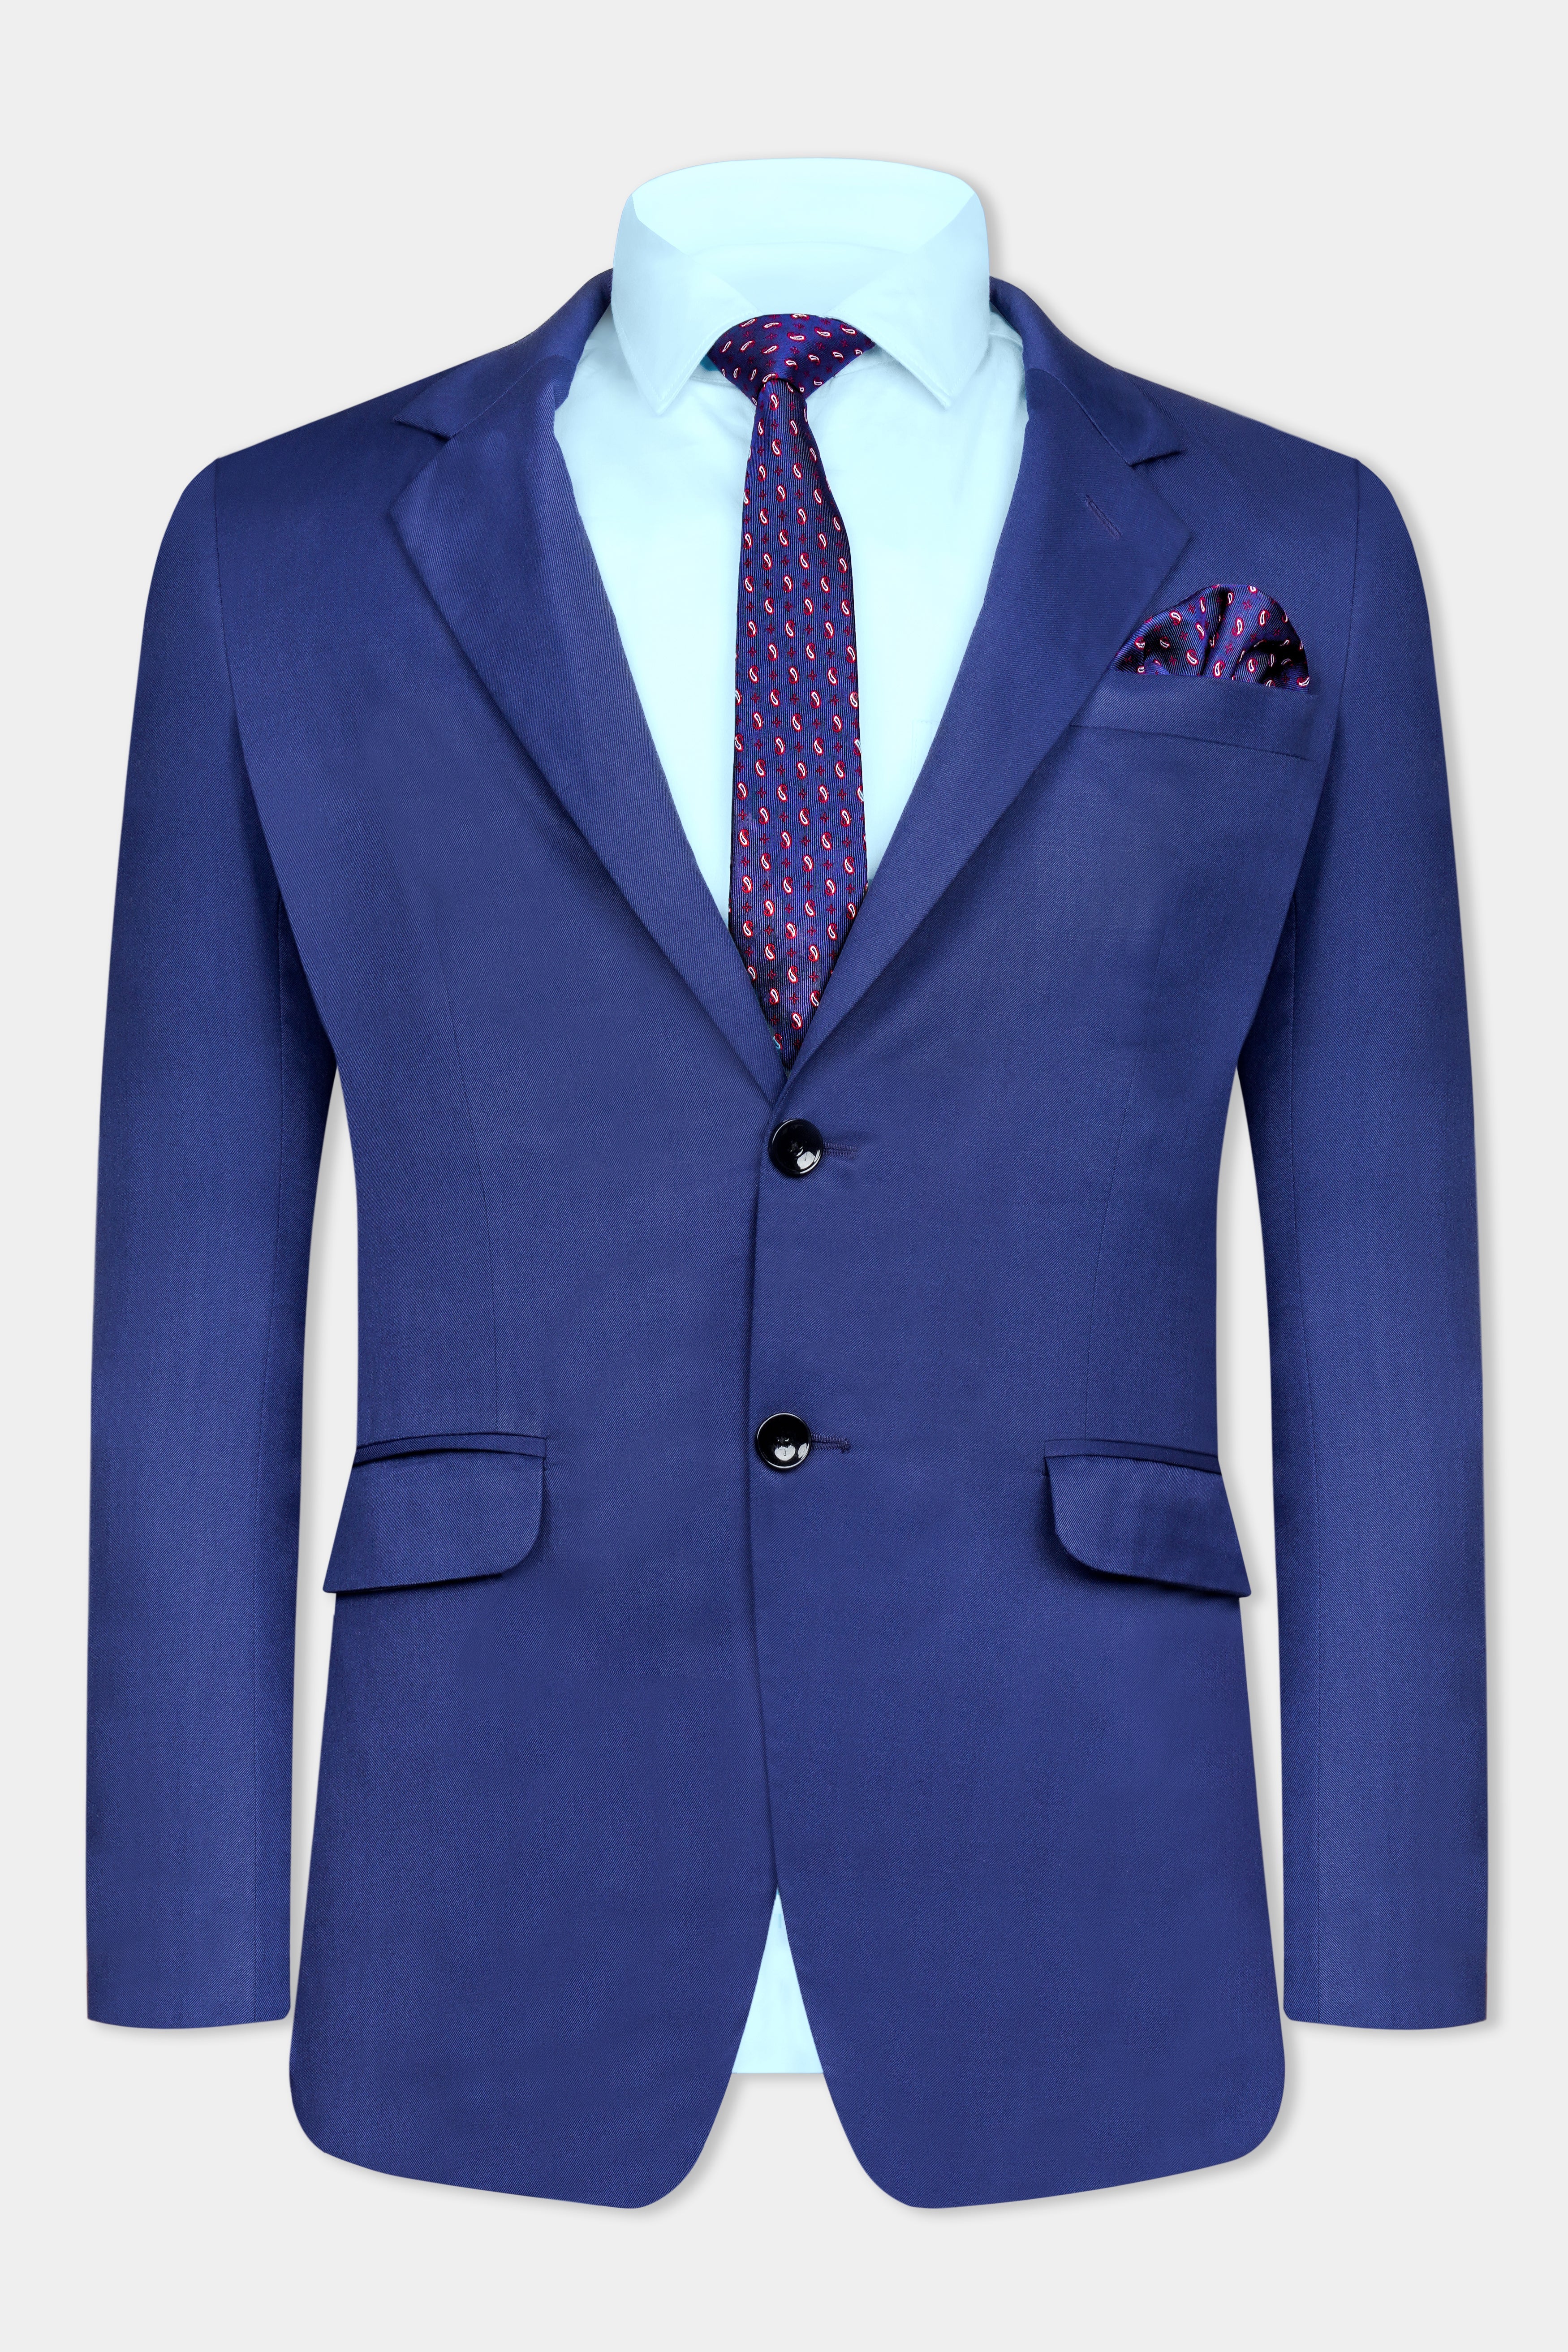 Admiral Blue Wool Rich Single Breasted Suit ST3057-SB-36, ST3057-SB-38, ST3057-SB-40, ST3057-SB-42, ST3057-SB-44, ST3057-SB-46, ST3057-SB-48, ST3057-SB-50, ST3057-SB-52, ST3057-SB-54, ST3057-SB-56, ST3057-SB-58, ST3057-SB-60